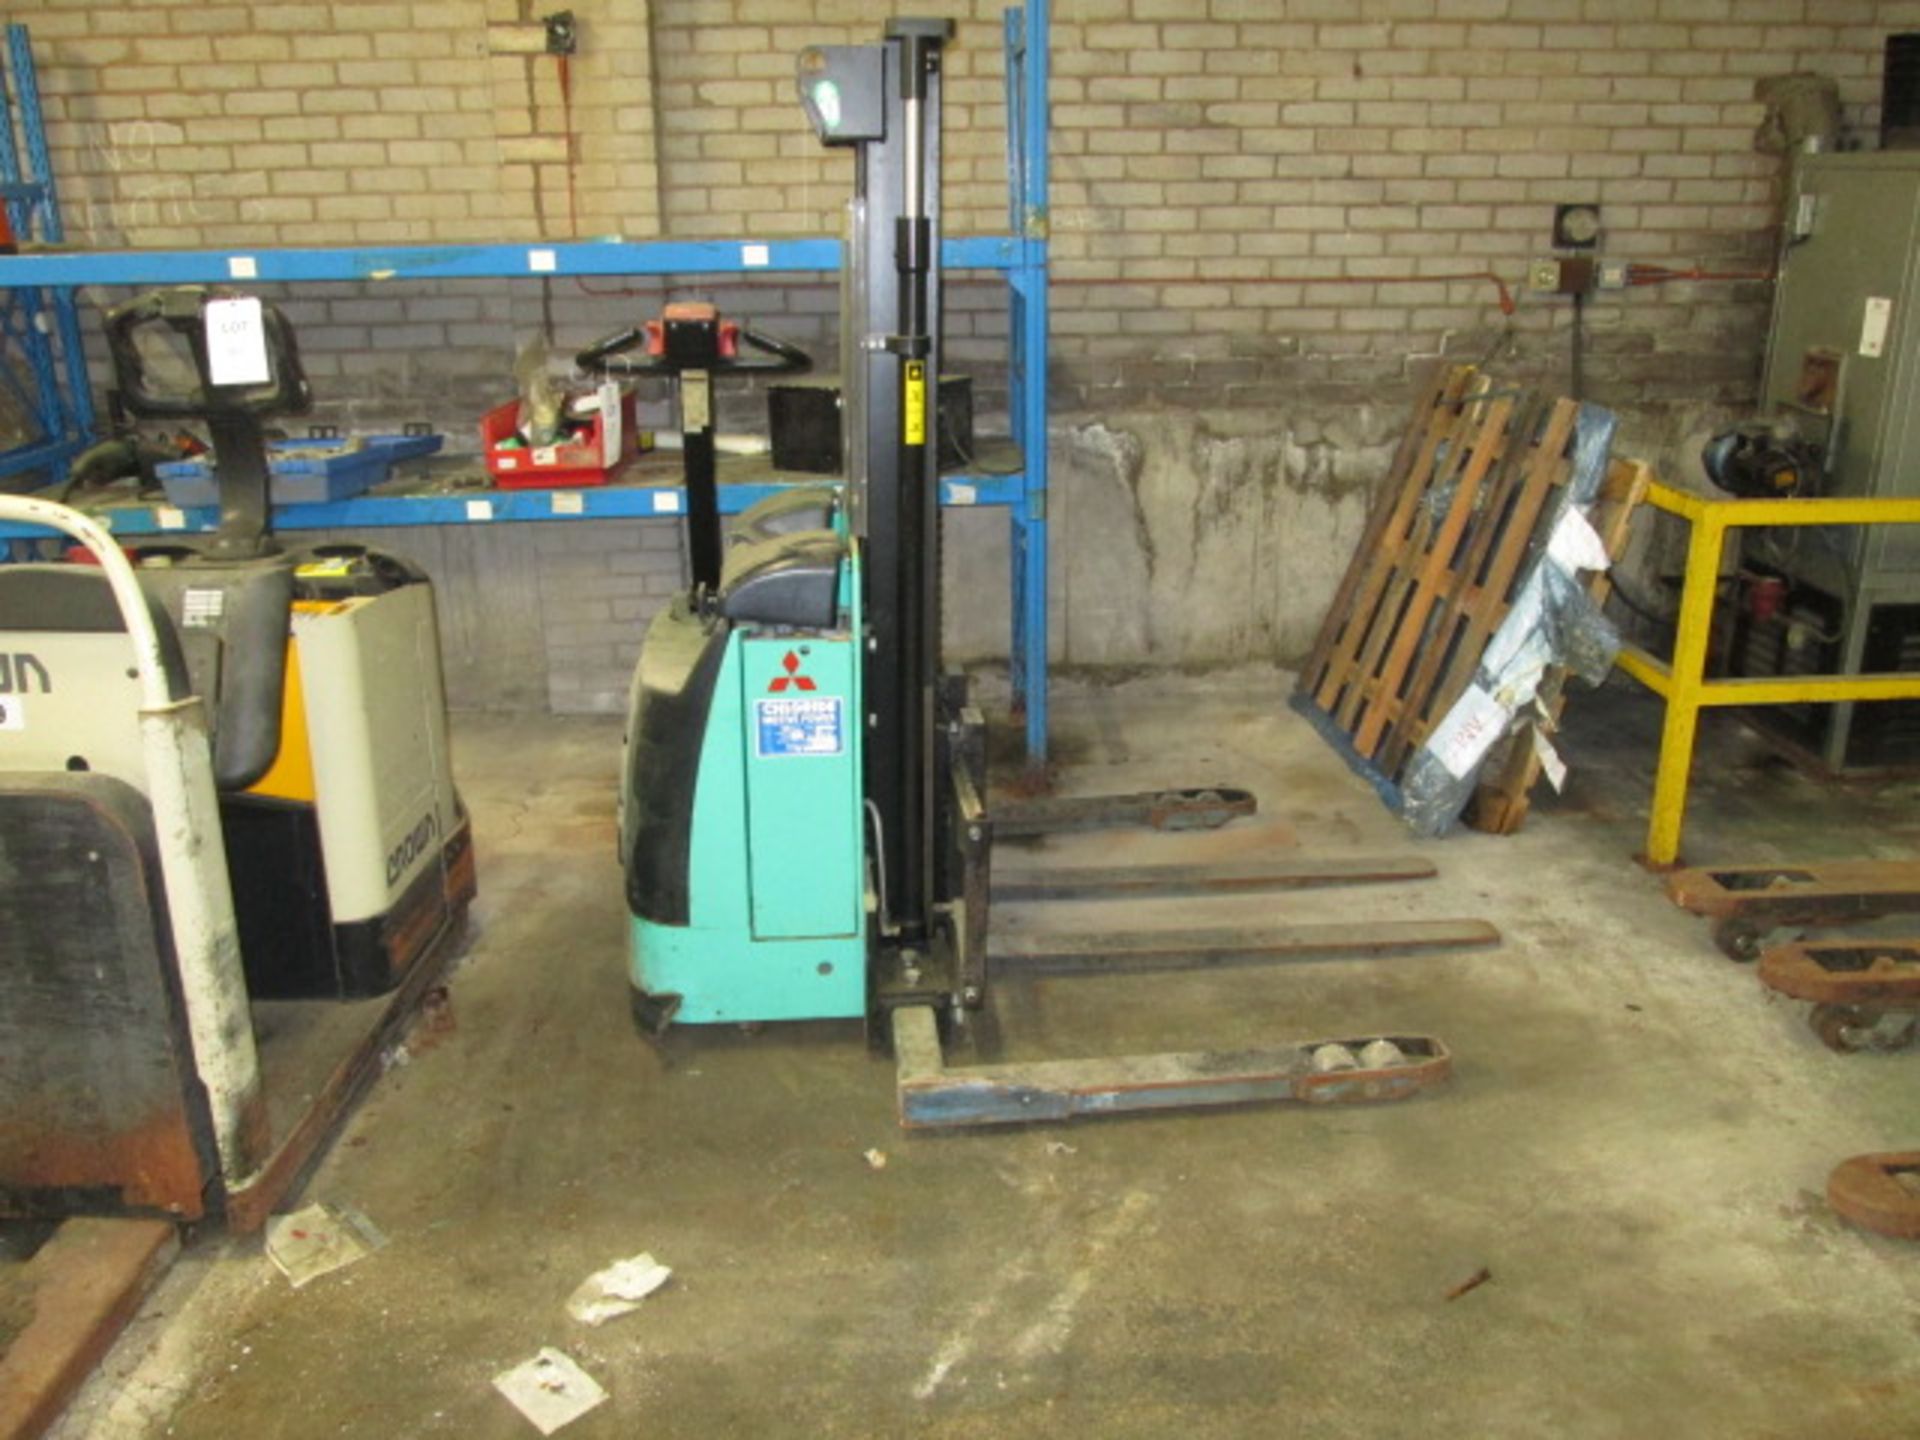 Mitsubishi pallet stacker No17, s/n SP1200215 and 3 - Mitsubishi electric pallet truck, s/n - Image 6 of 6